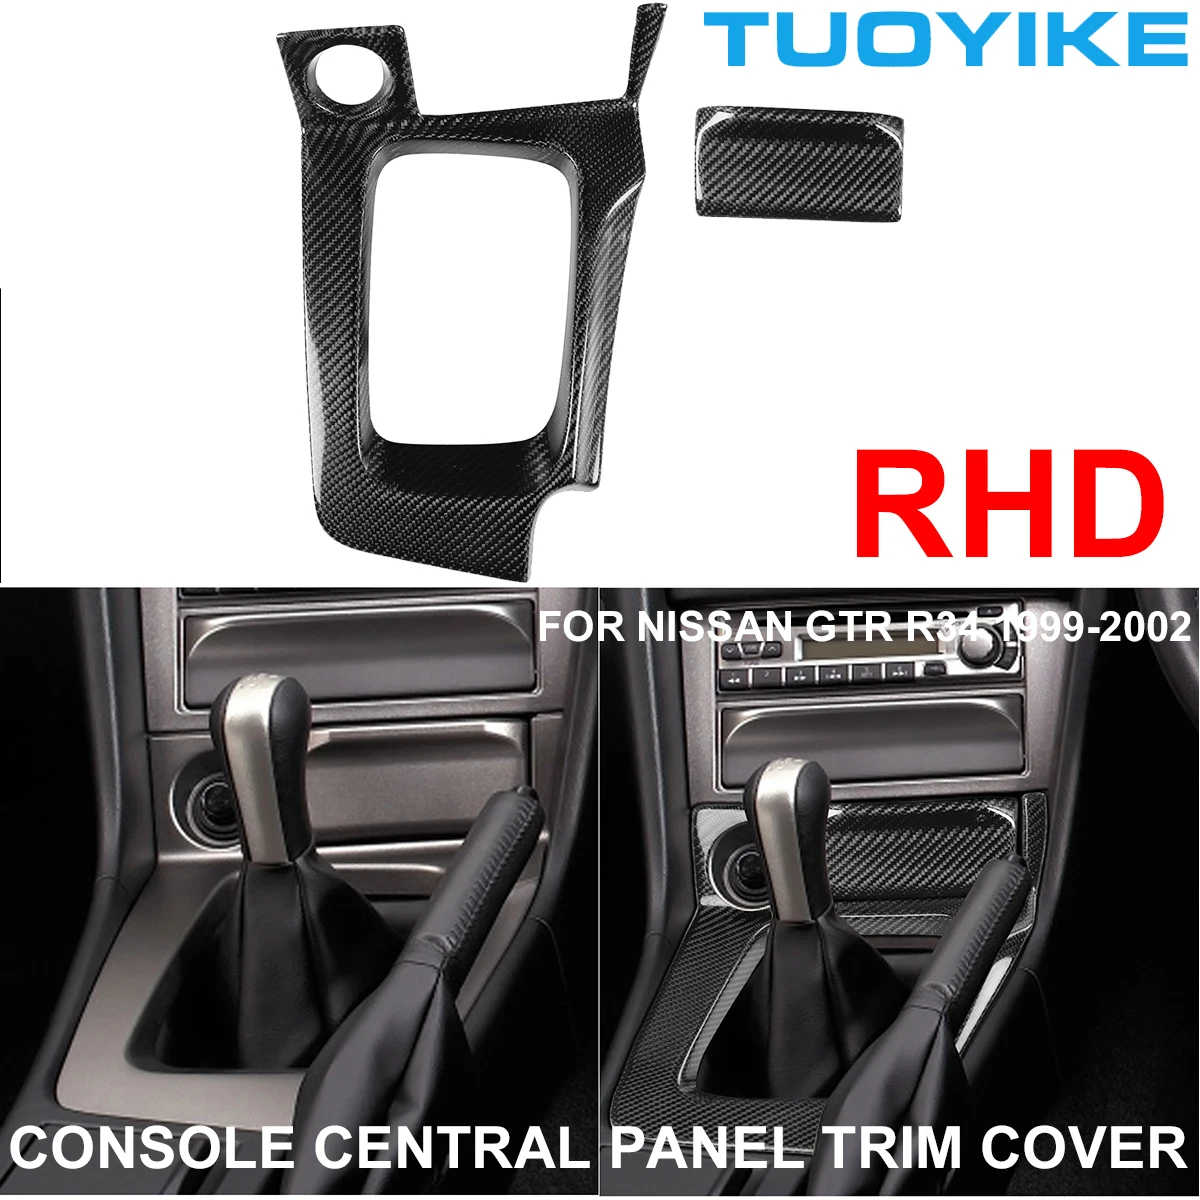 

RHD Car Styling Real Dry Carbon Fiber Central Console Gear Shift Decal Trim Cover Panel Sticker For Nissan GTR R34 1999-2002